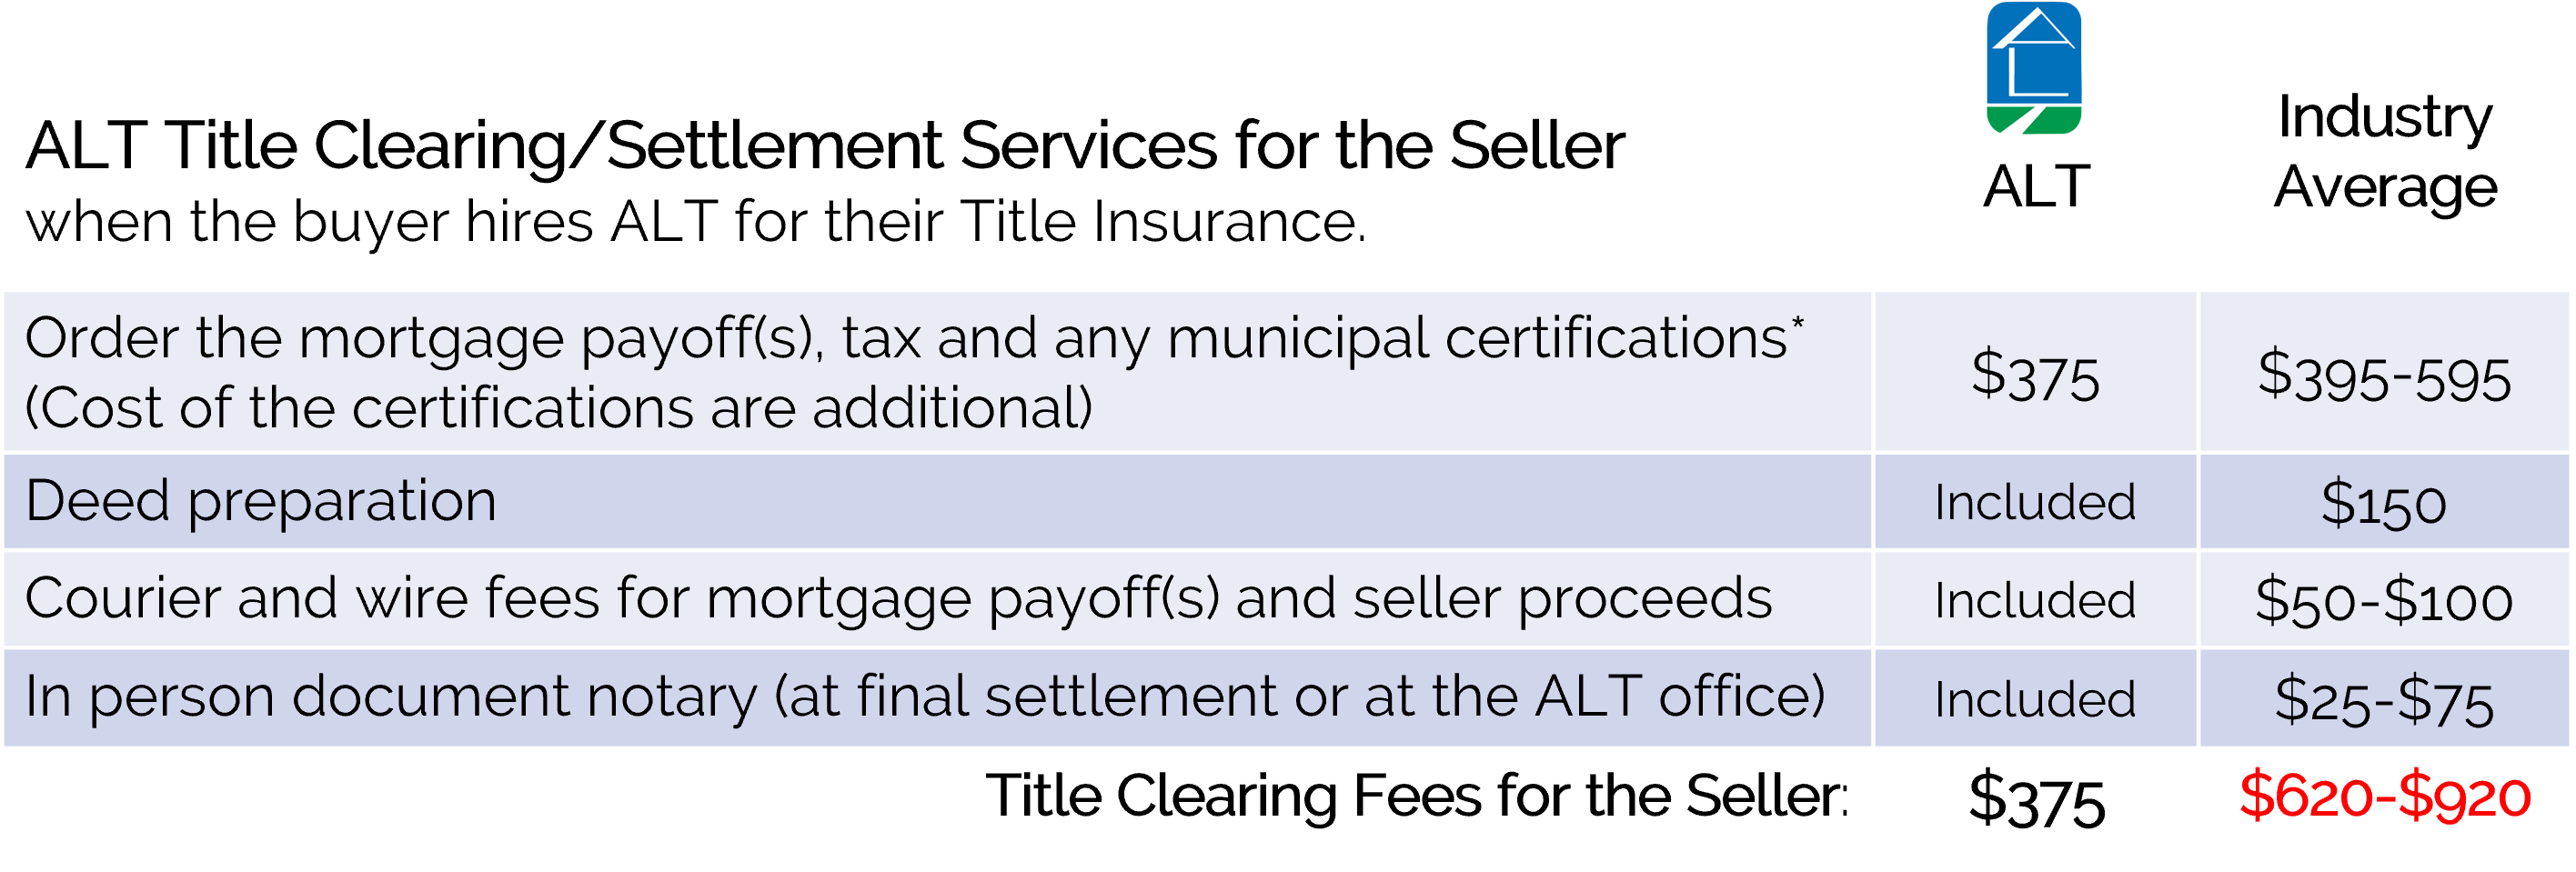 final pa title clearing services $375